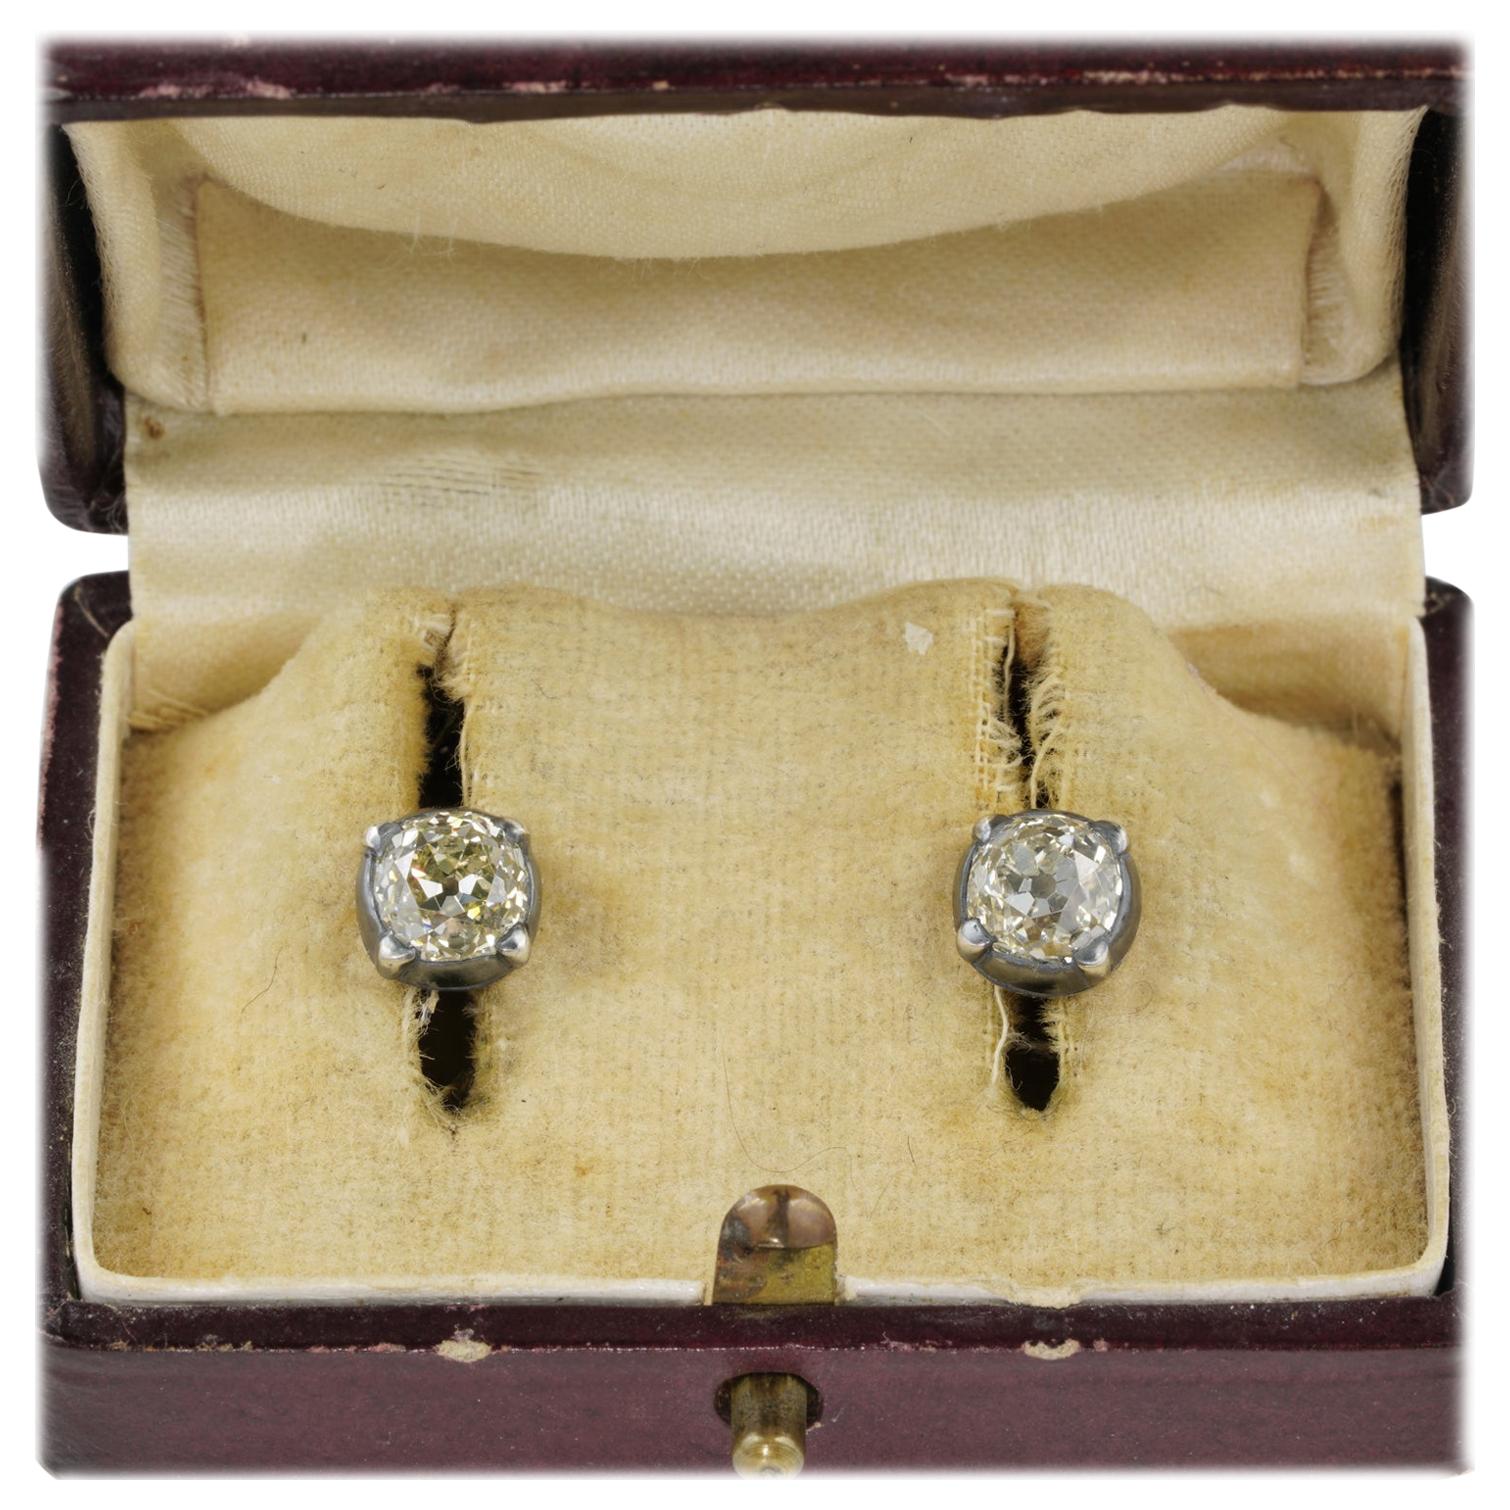 Sparkle By Candle Light

Not easy to come across, Victorian early era Diamond stud earrings are the best to have always on!
Hand crafted of solid 18 KT gold topped by silver, typical 1860 ca fittings, posts are latter for safety
Two Old Mine cut